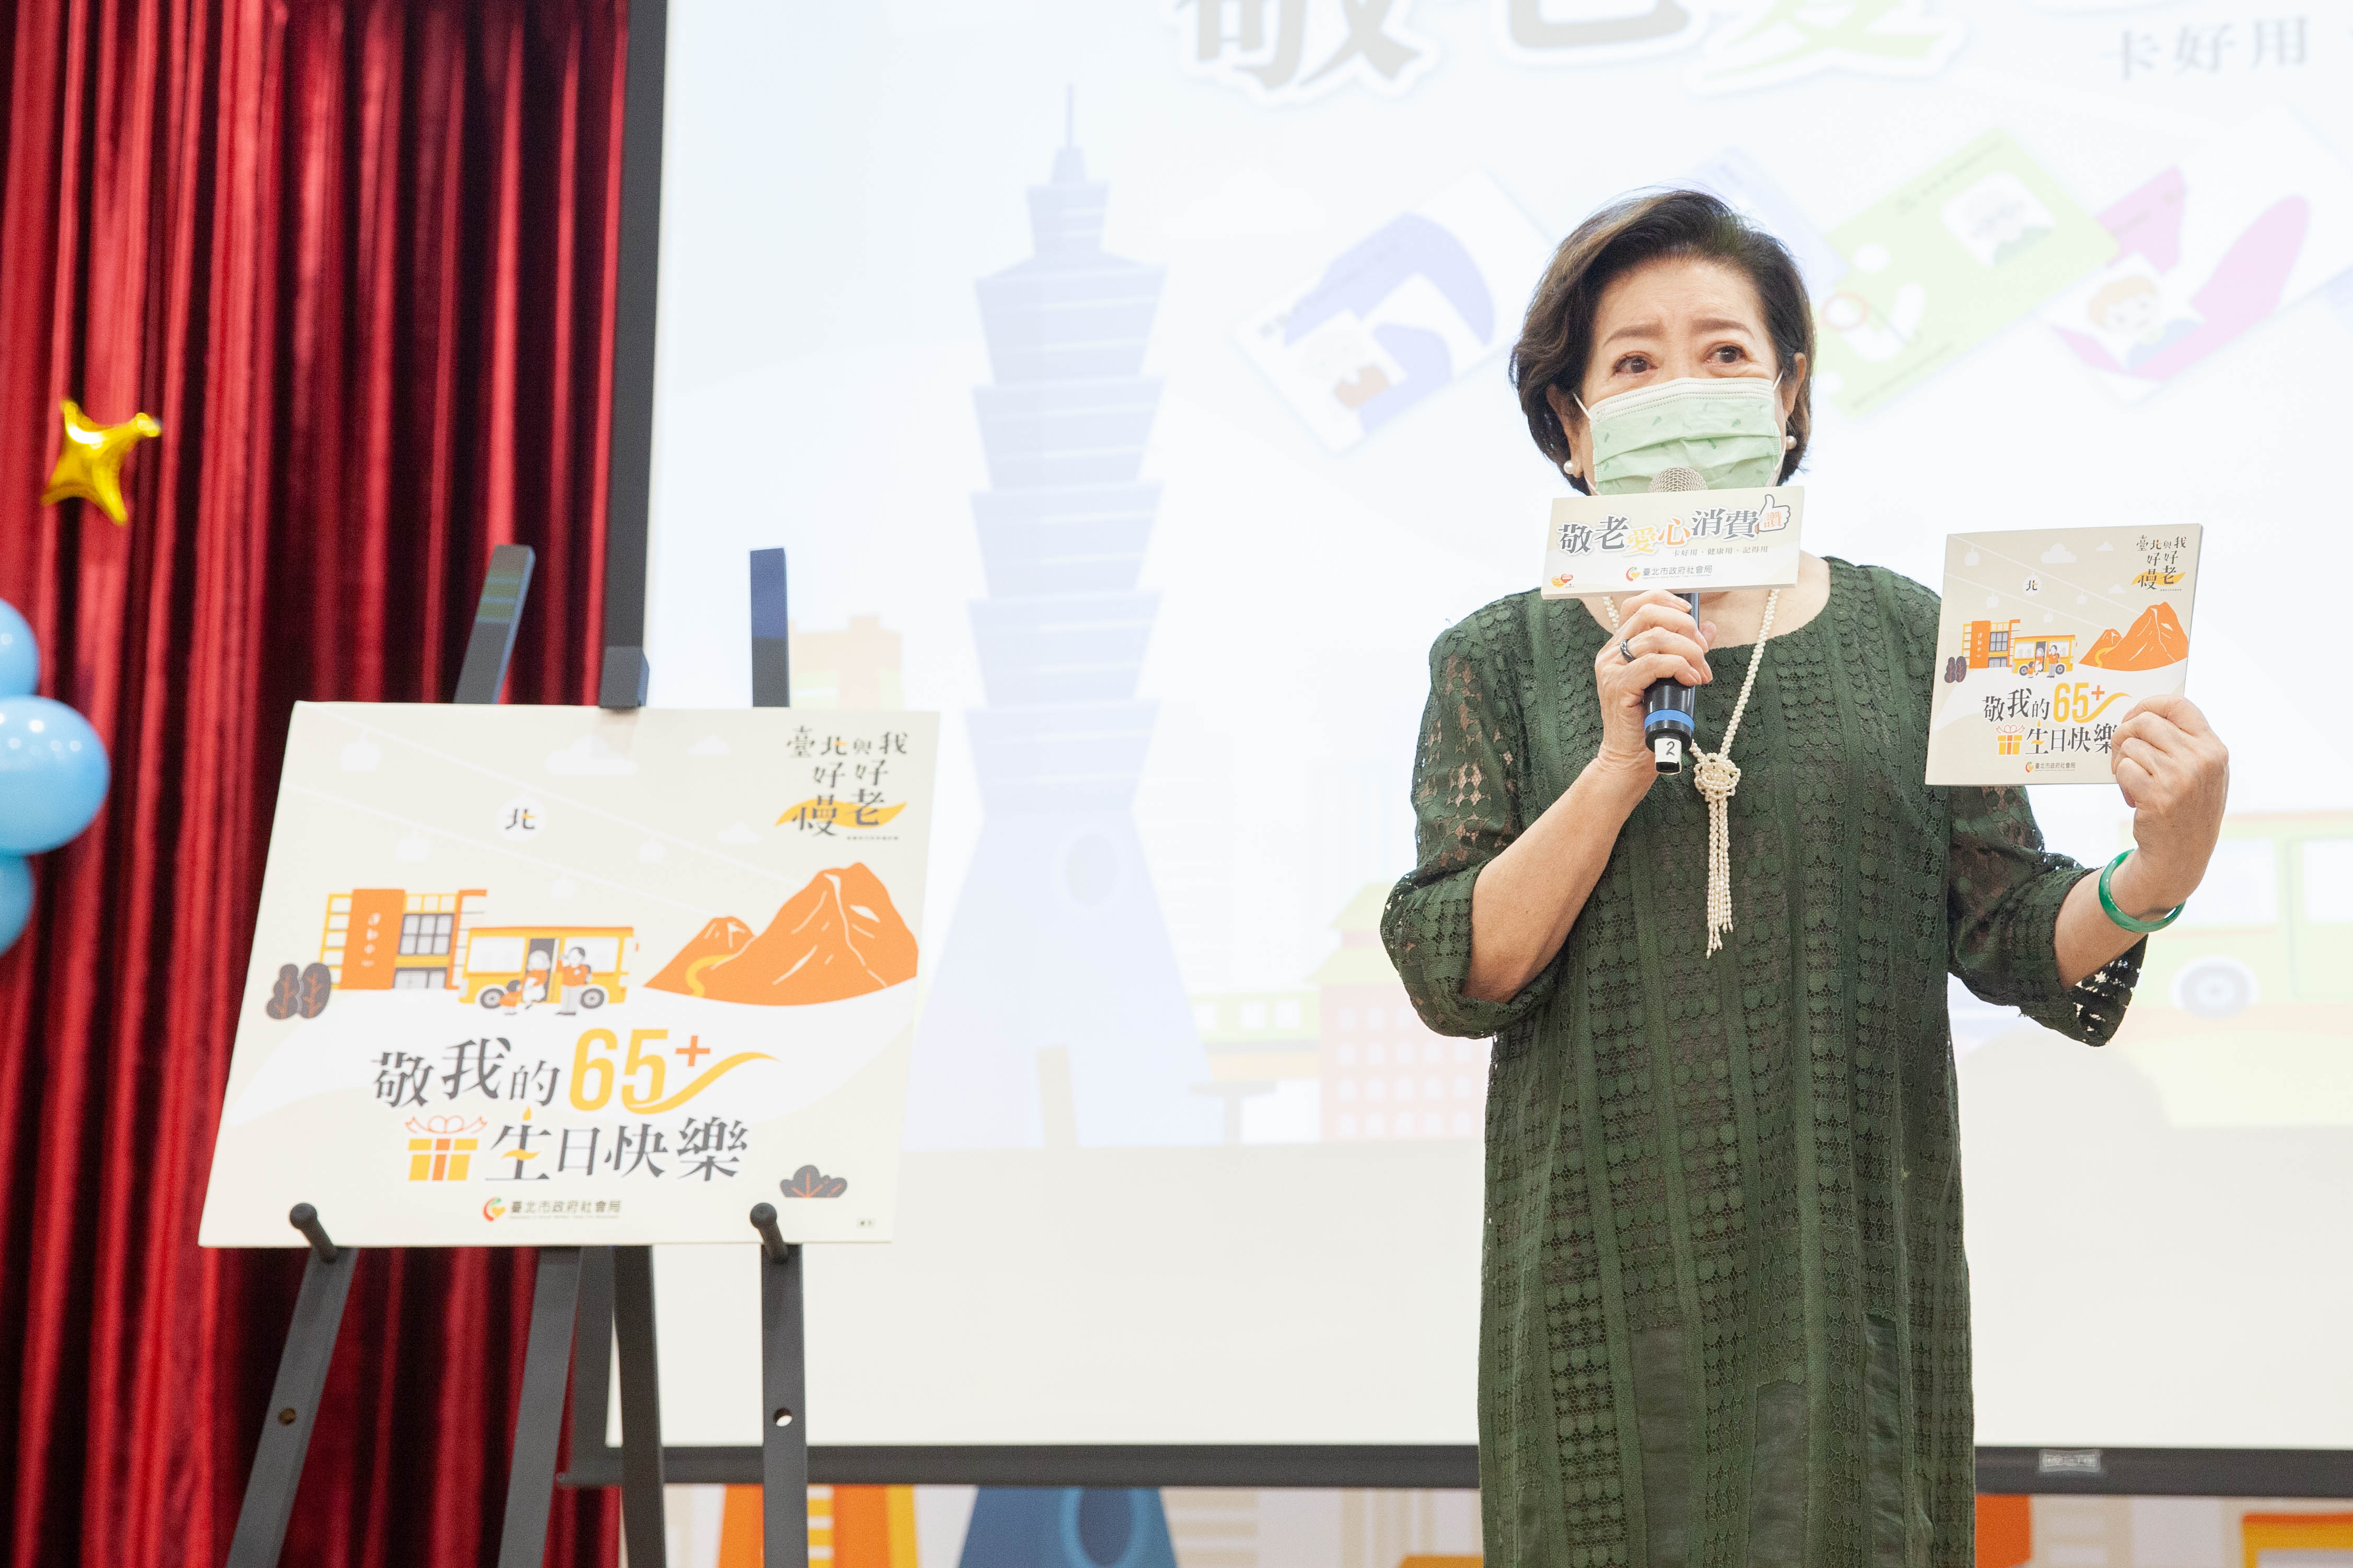 Chen Shu-fang, the Taipei’s Senior Citizen Card Ambassador, promoted the new activities. (Photo / Provided by the Taipei City Government)